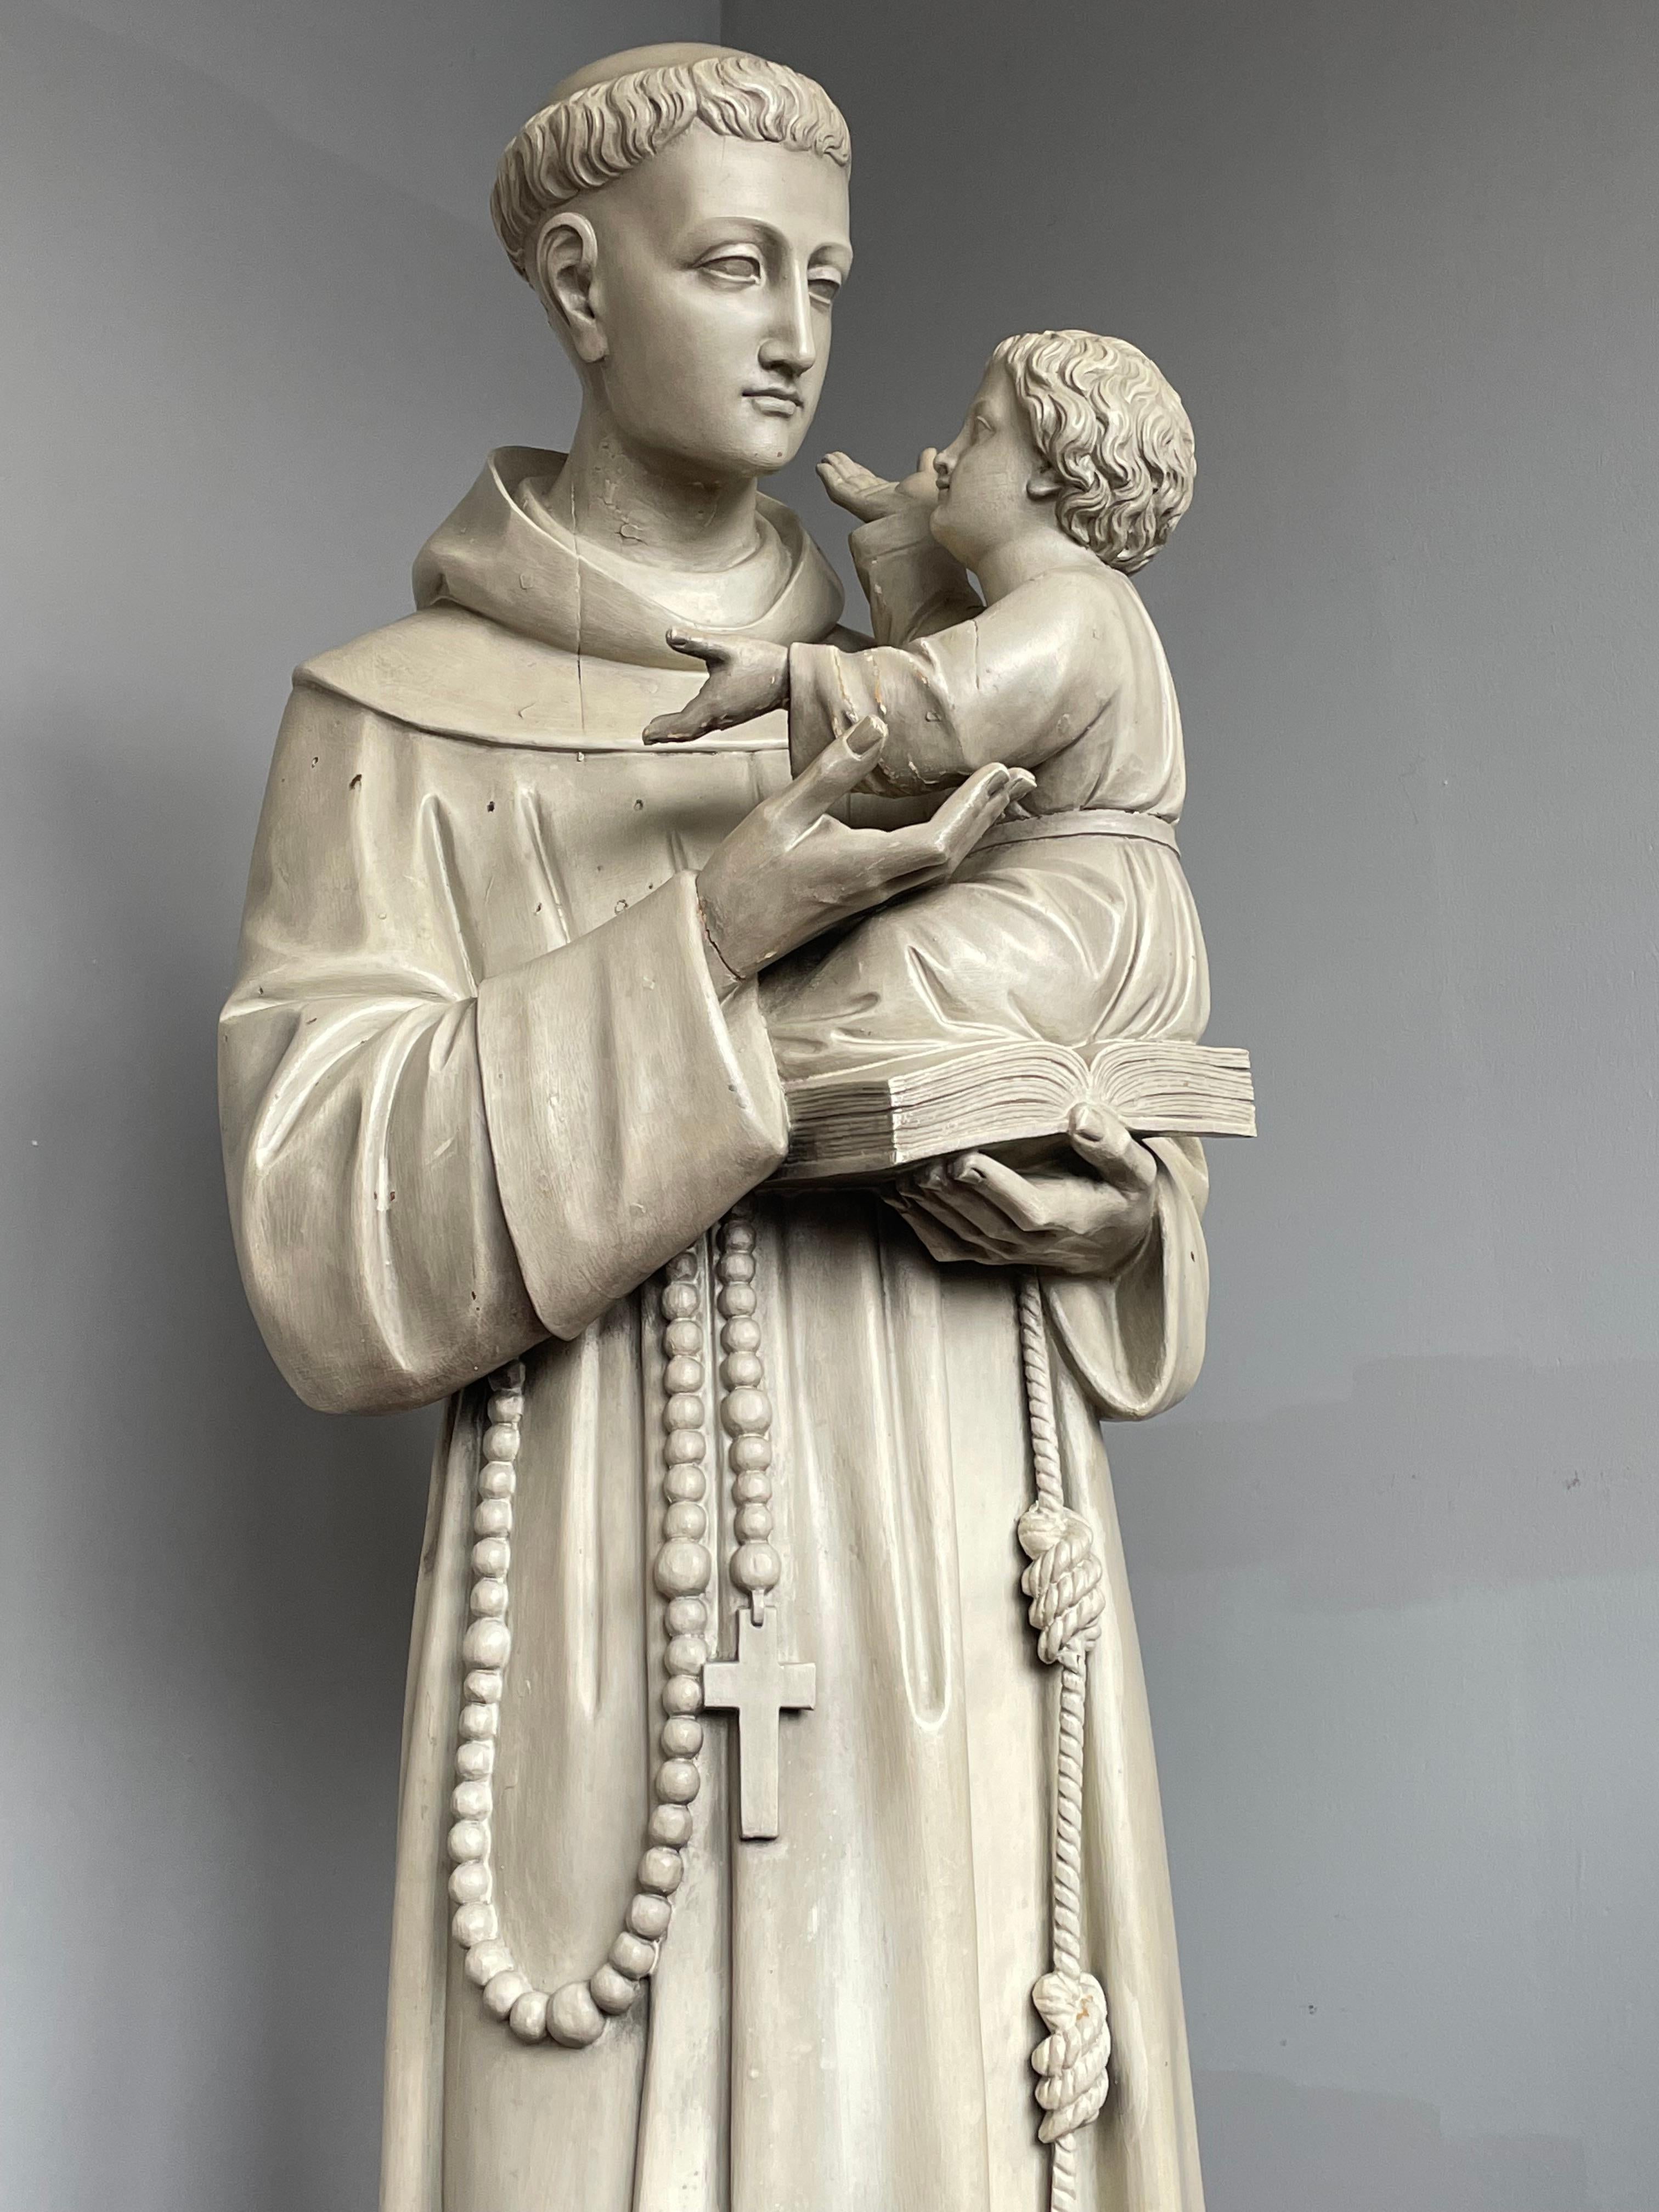 20th Century Antique and Large Hand Carved Wooden Saint Anthony of Padua Statue / Sculpture For Sale